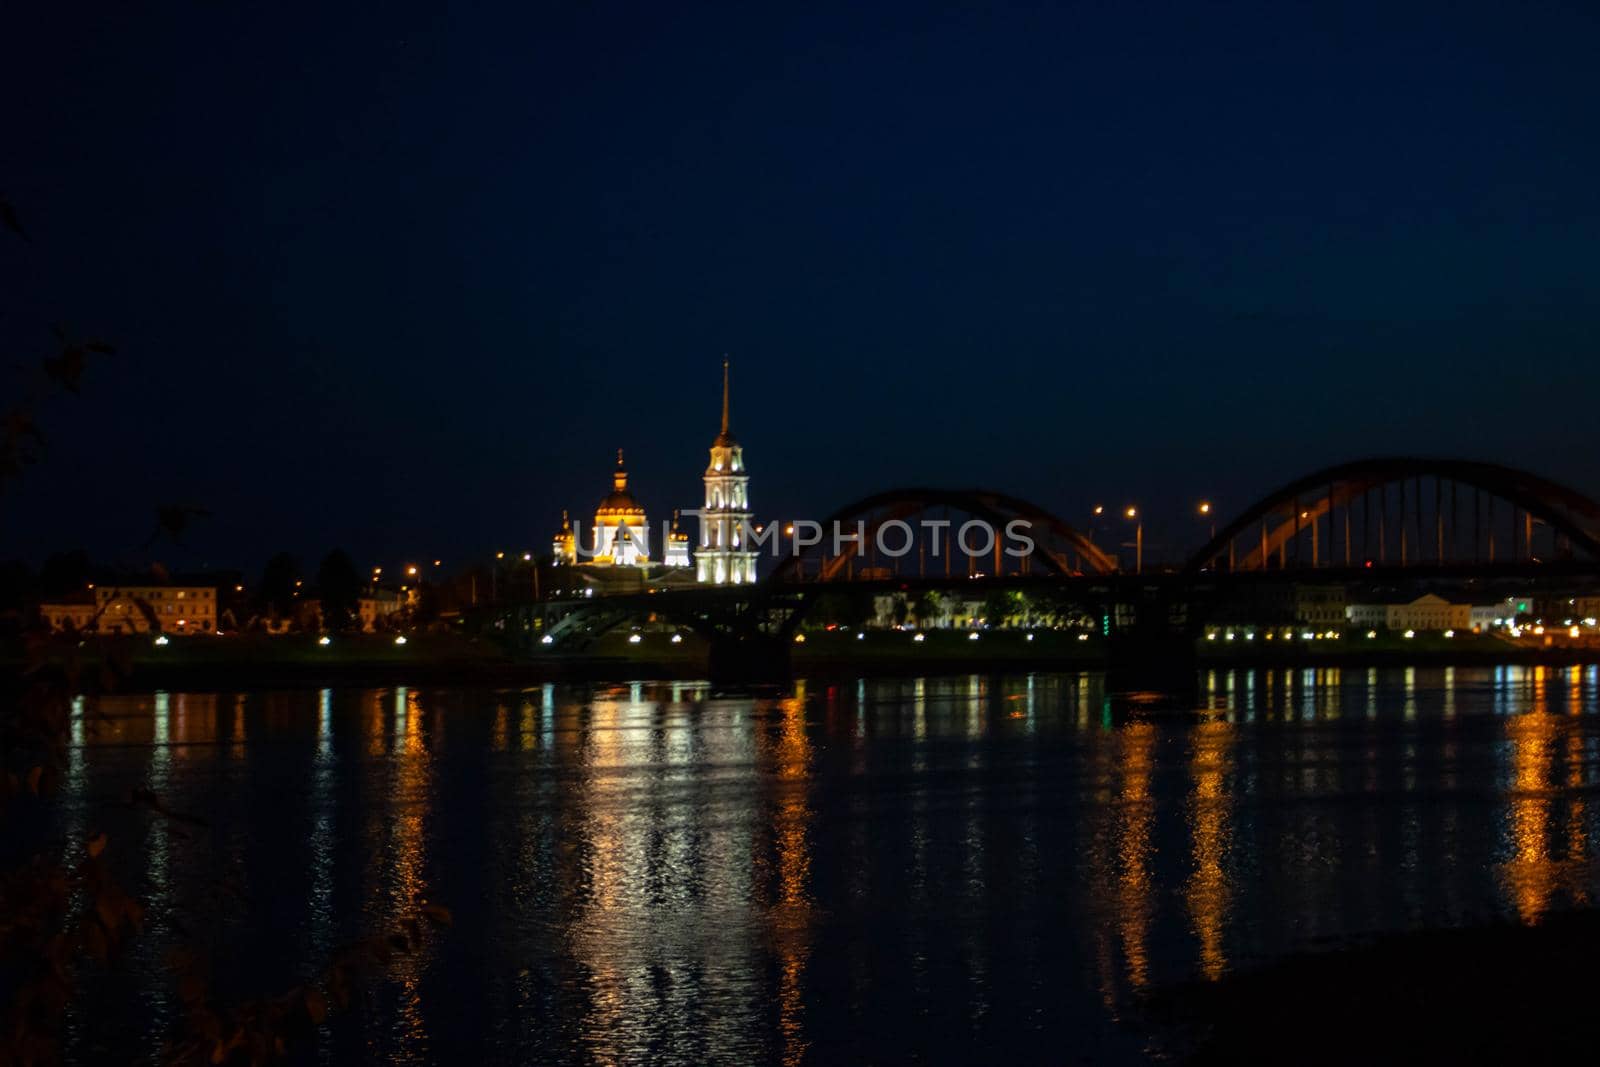 Nocturnal image of the passage of a river through the city where there is a bridge, houses, streetlights and at the end the belfry of the city cathedral by lapushka62